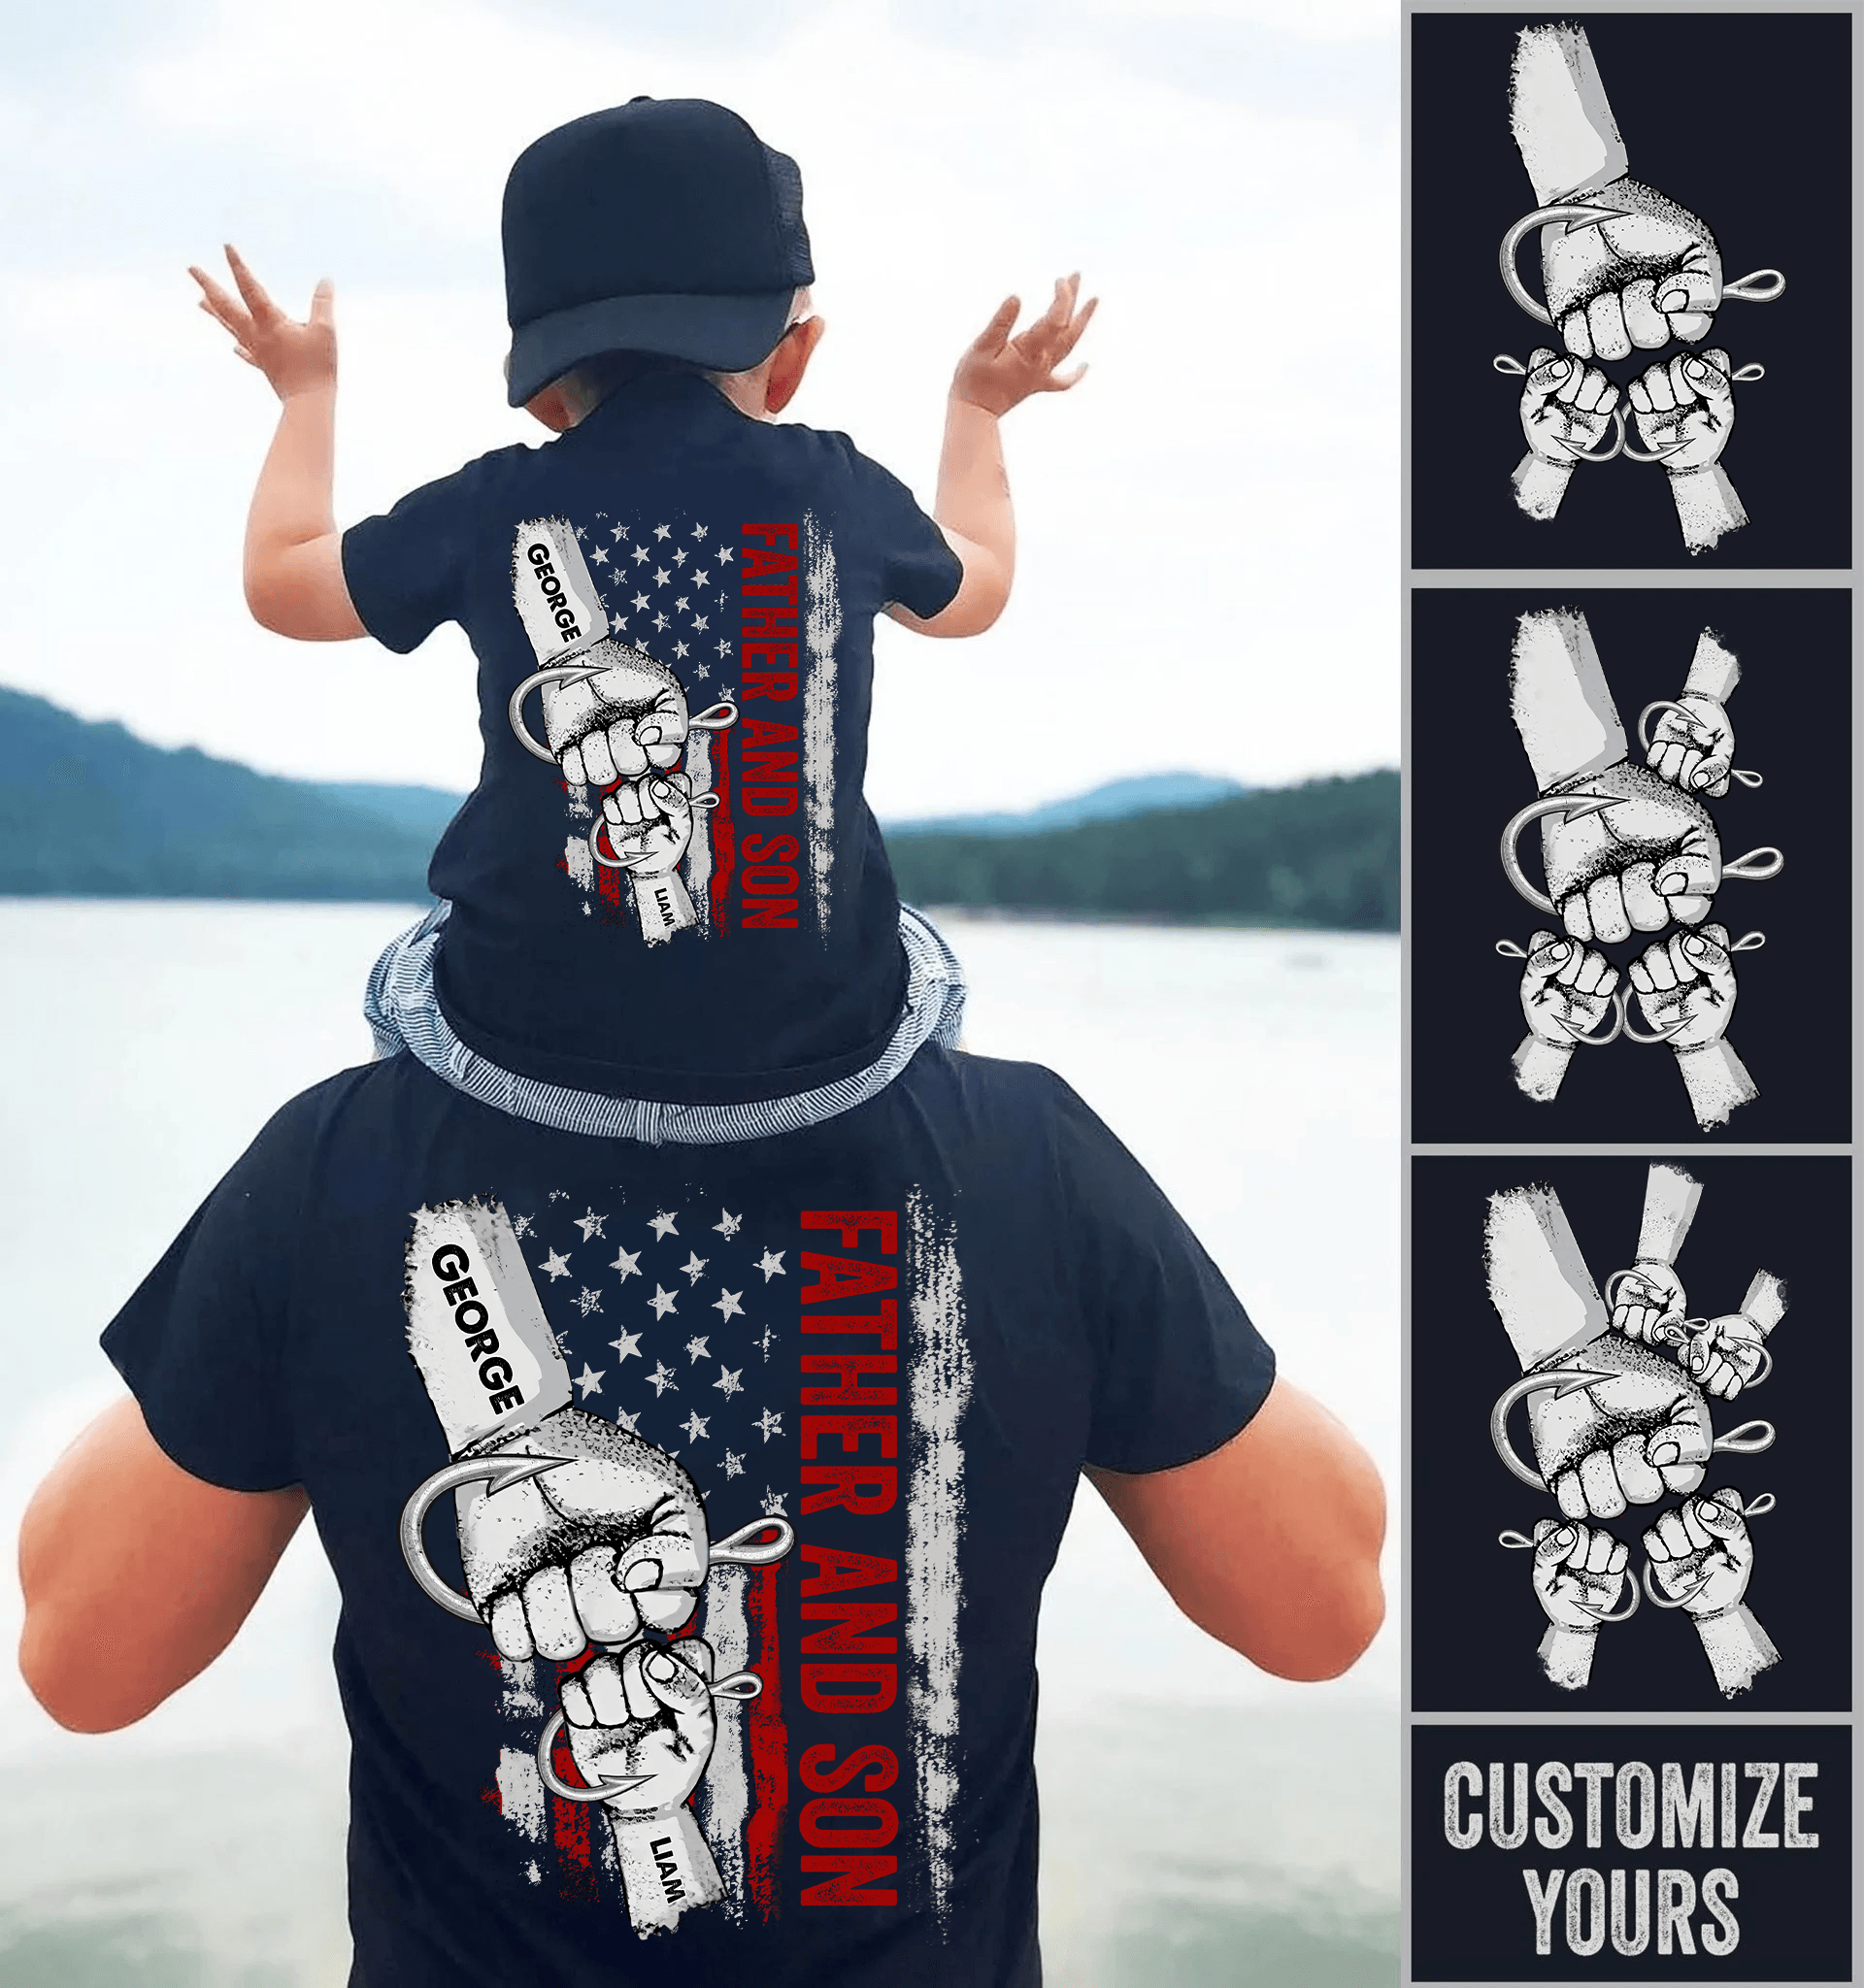 We Hooked The Best Dad Raised Fist Bump - Personalized Custom Back Printed Fishing T Shirt - Father's Day Funny Gift for Dad, Grandpa, Daddy, Dada, Husband, Dad Jokes, Reel Cool Dad